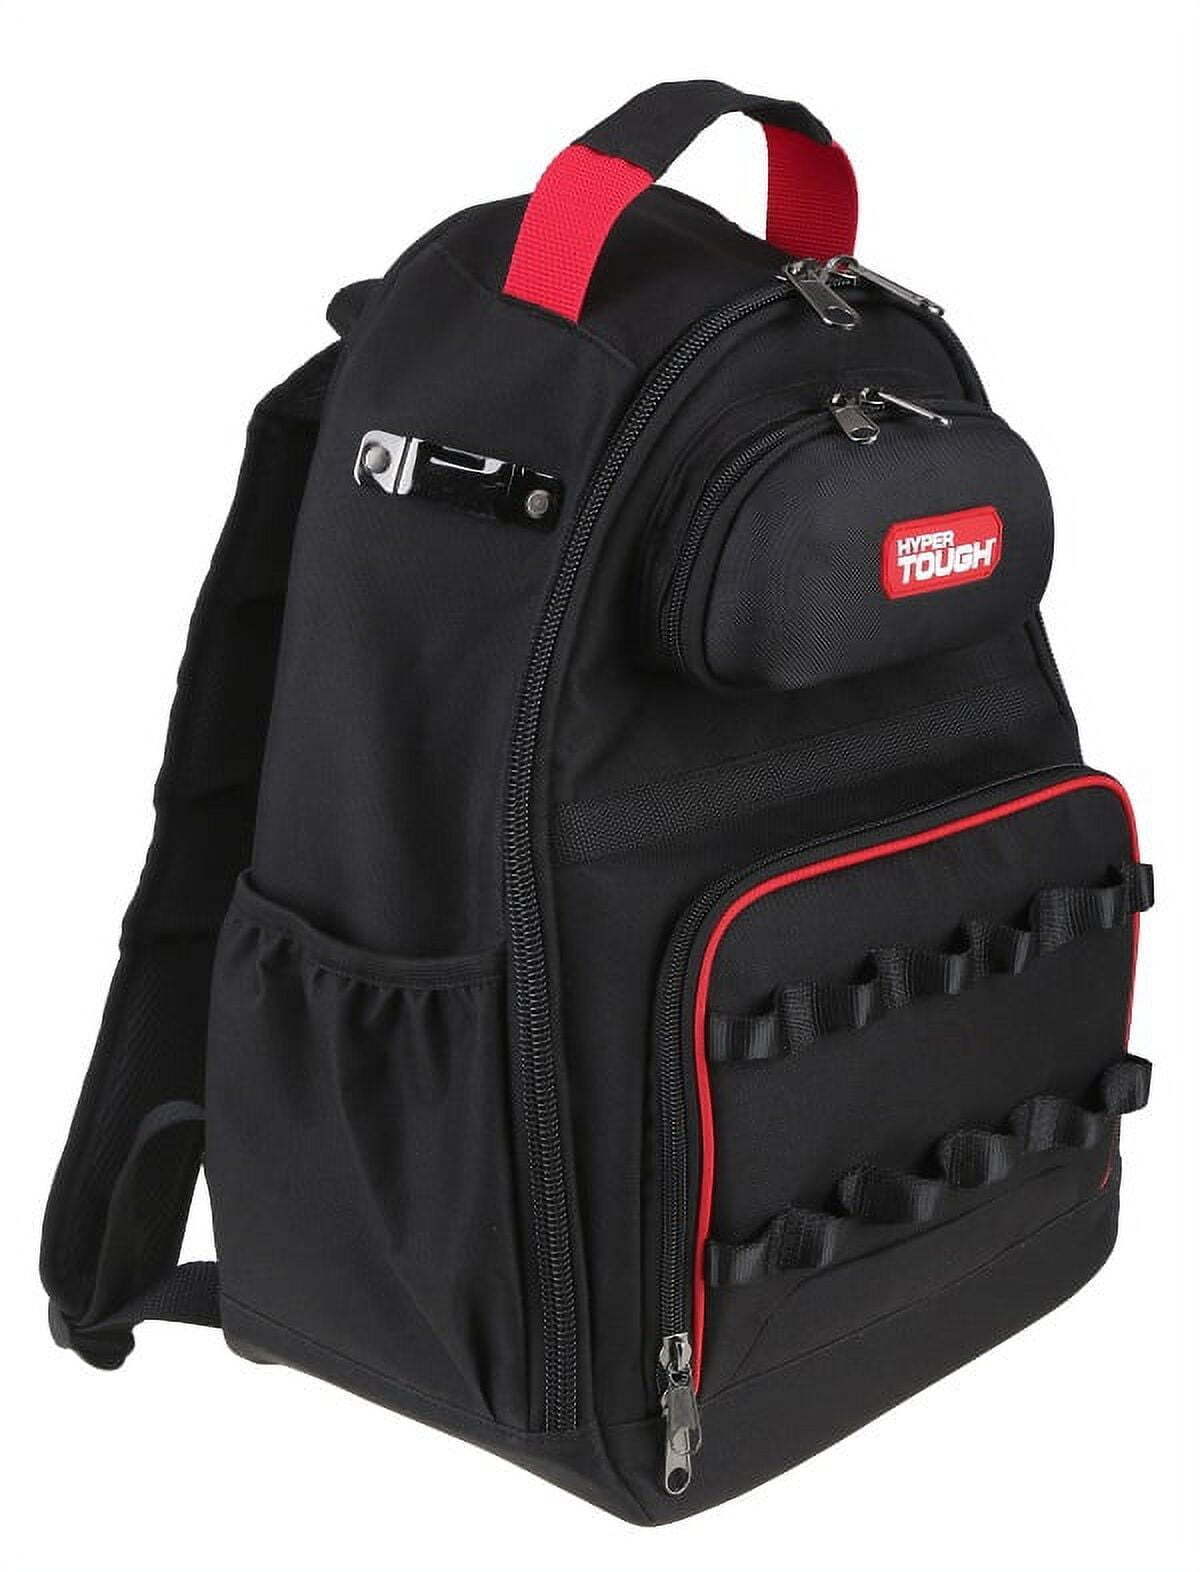 Black Tool Backpack with Pockets and Loops, Portable Tool Storage